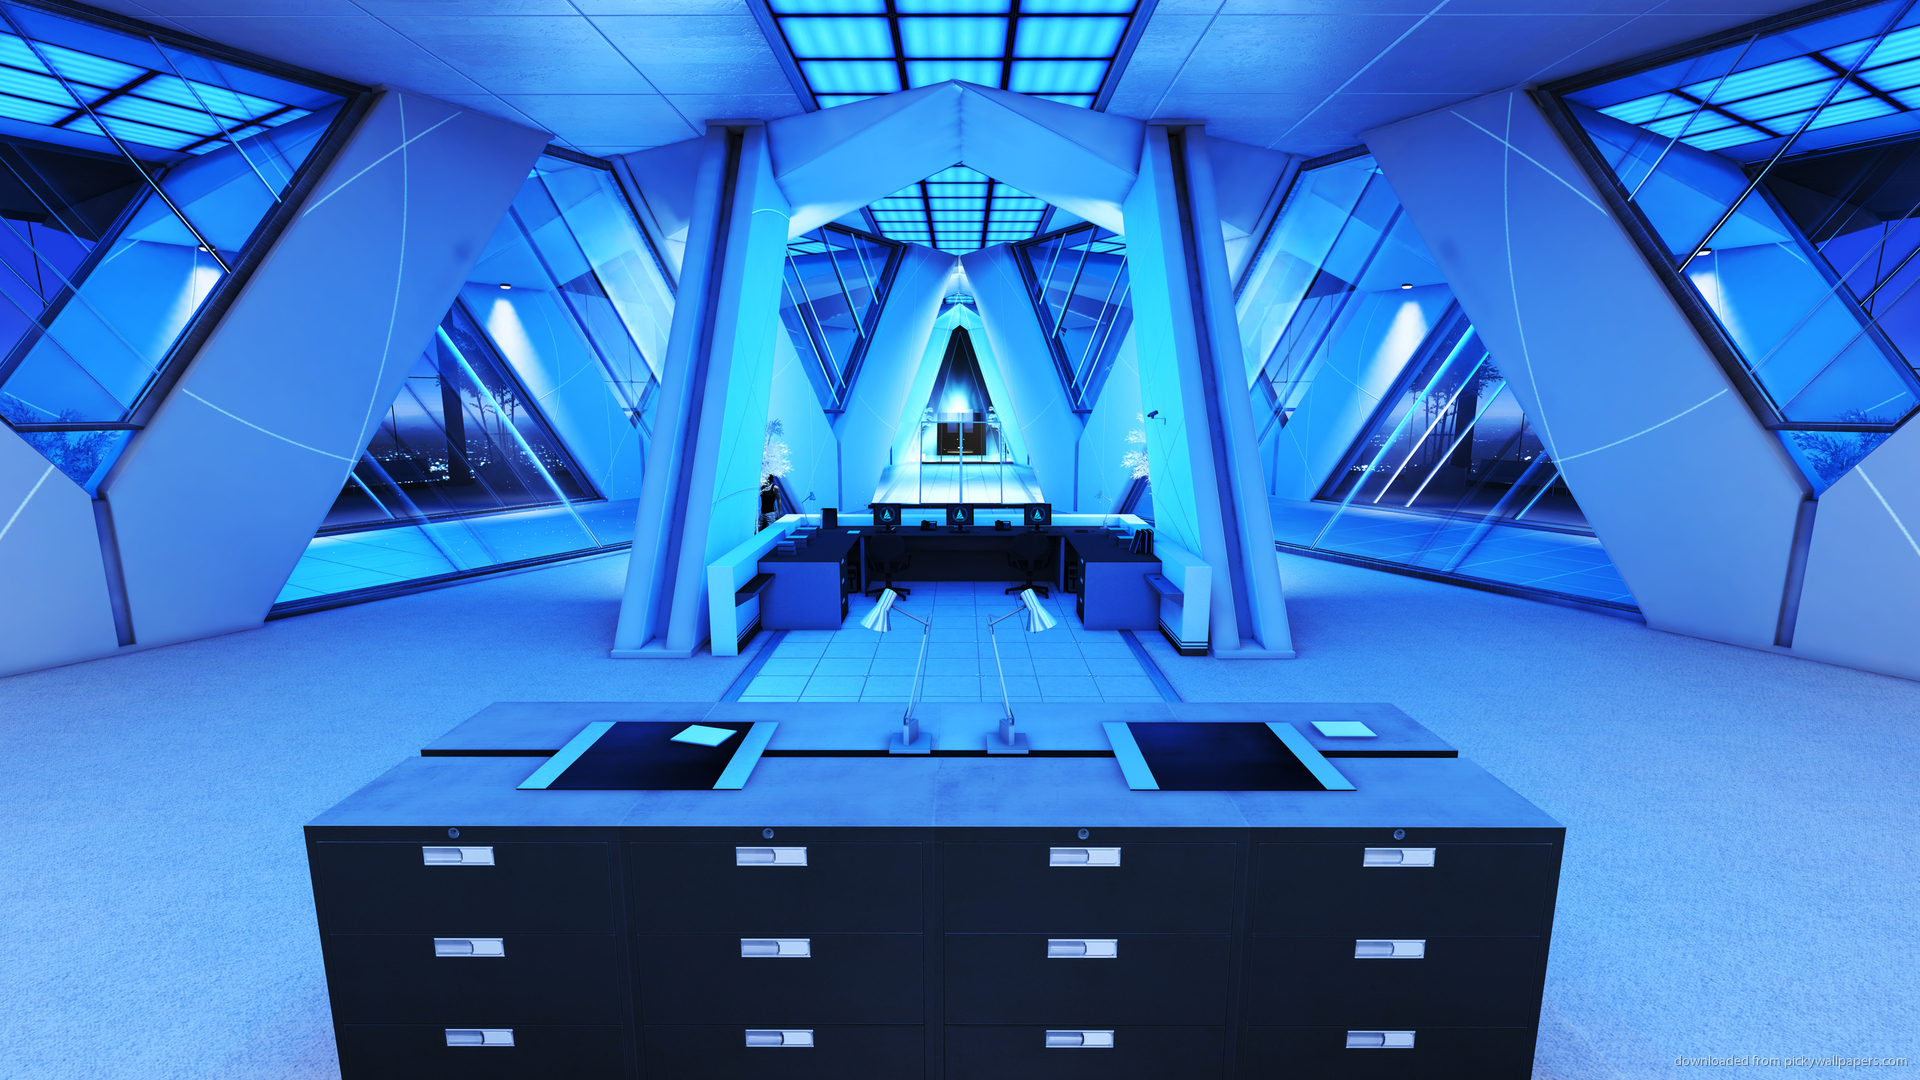 Mirror S Edge Server Room Wallpaper Link To This